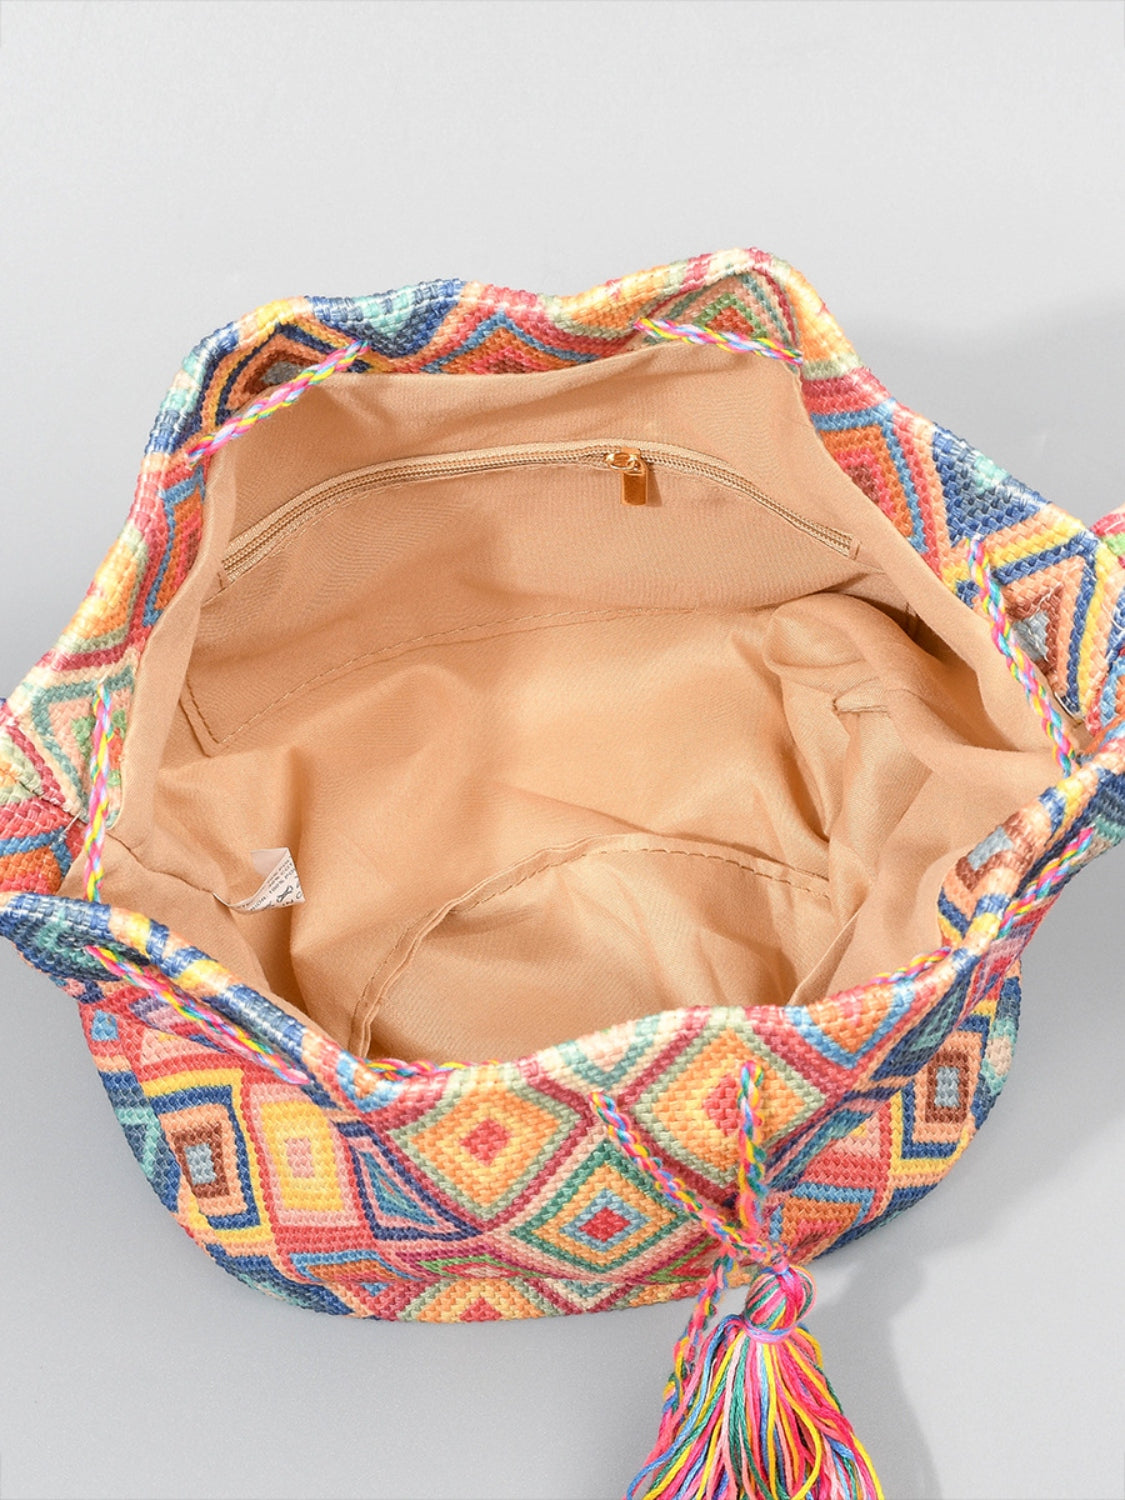 Colorful boho bucket bag with intricate woven patterns.